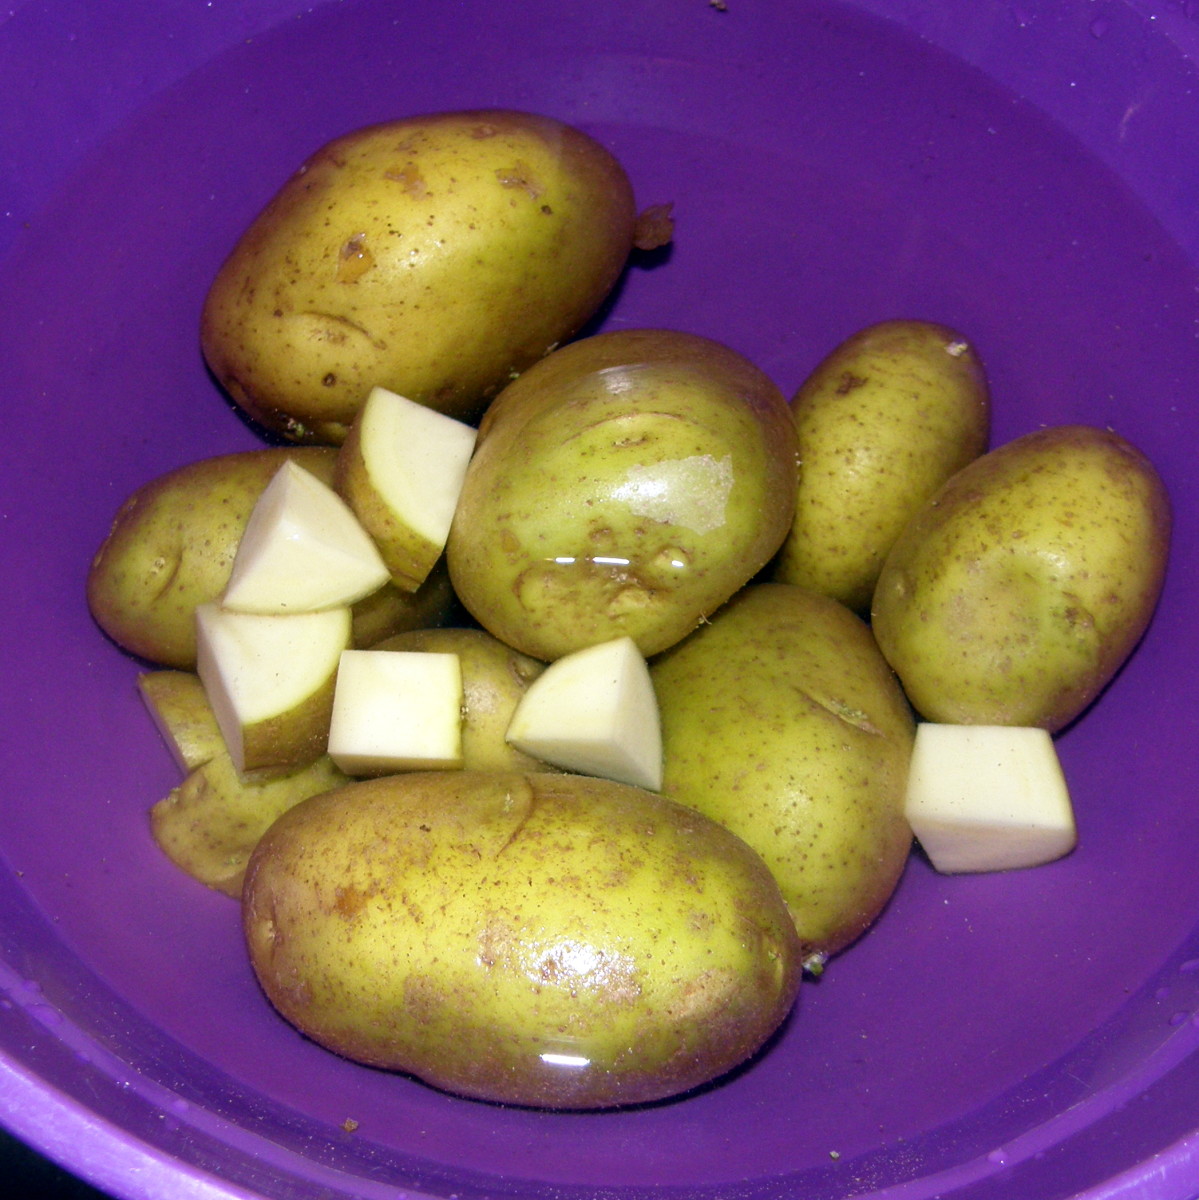 Cut the potatoes up into bite-sized chunks.